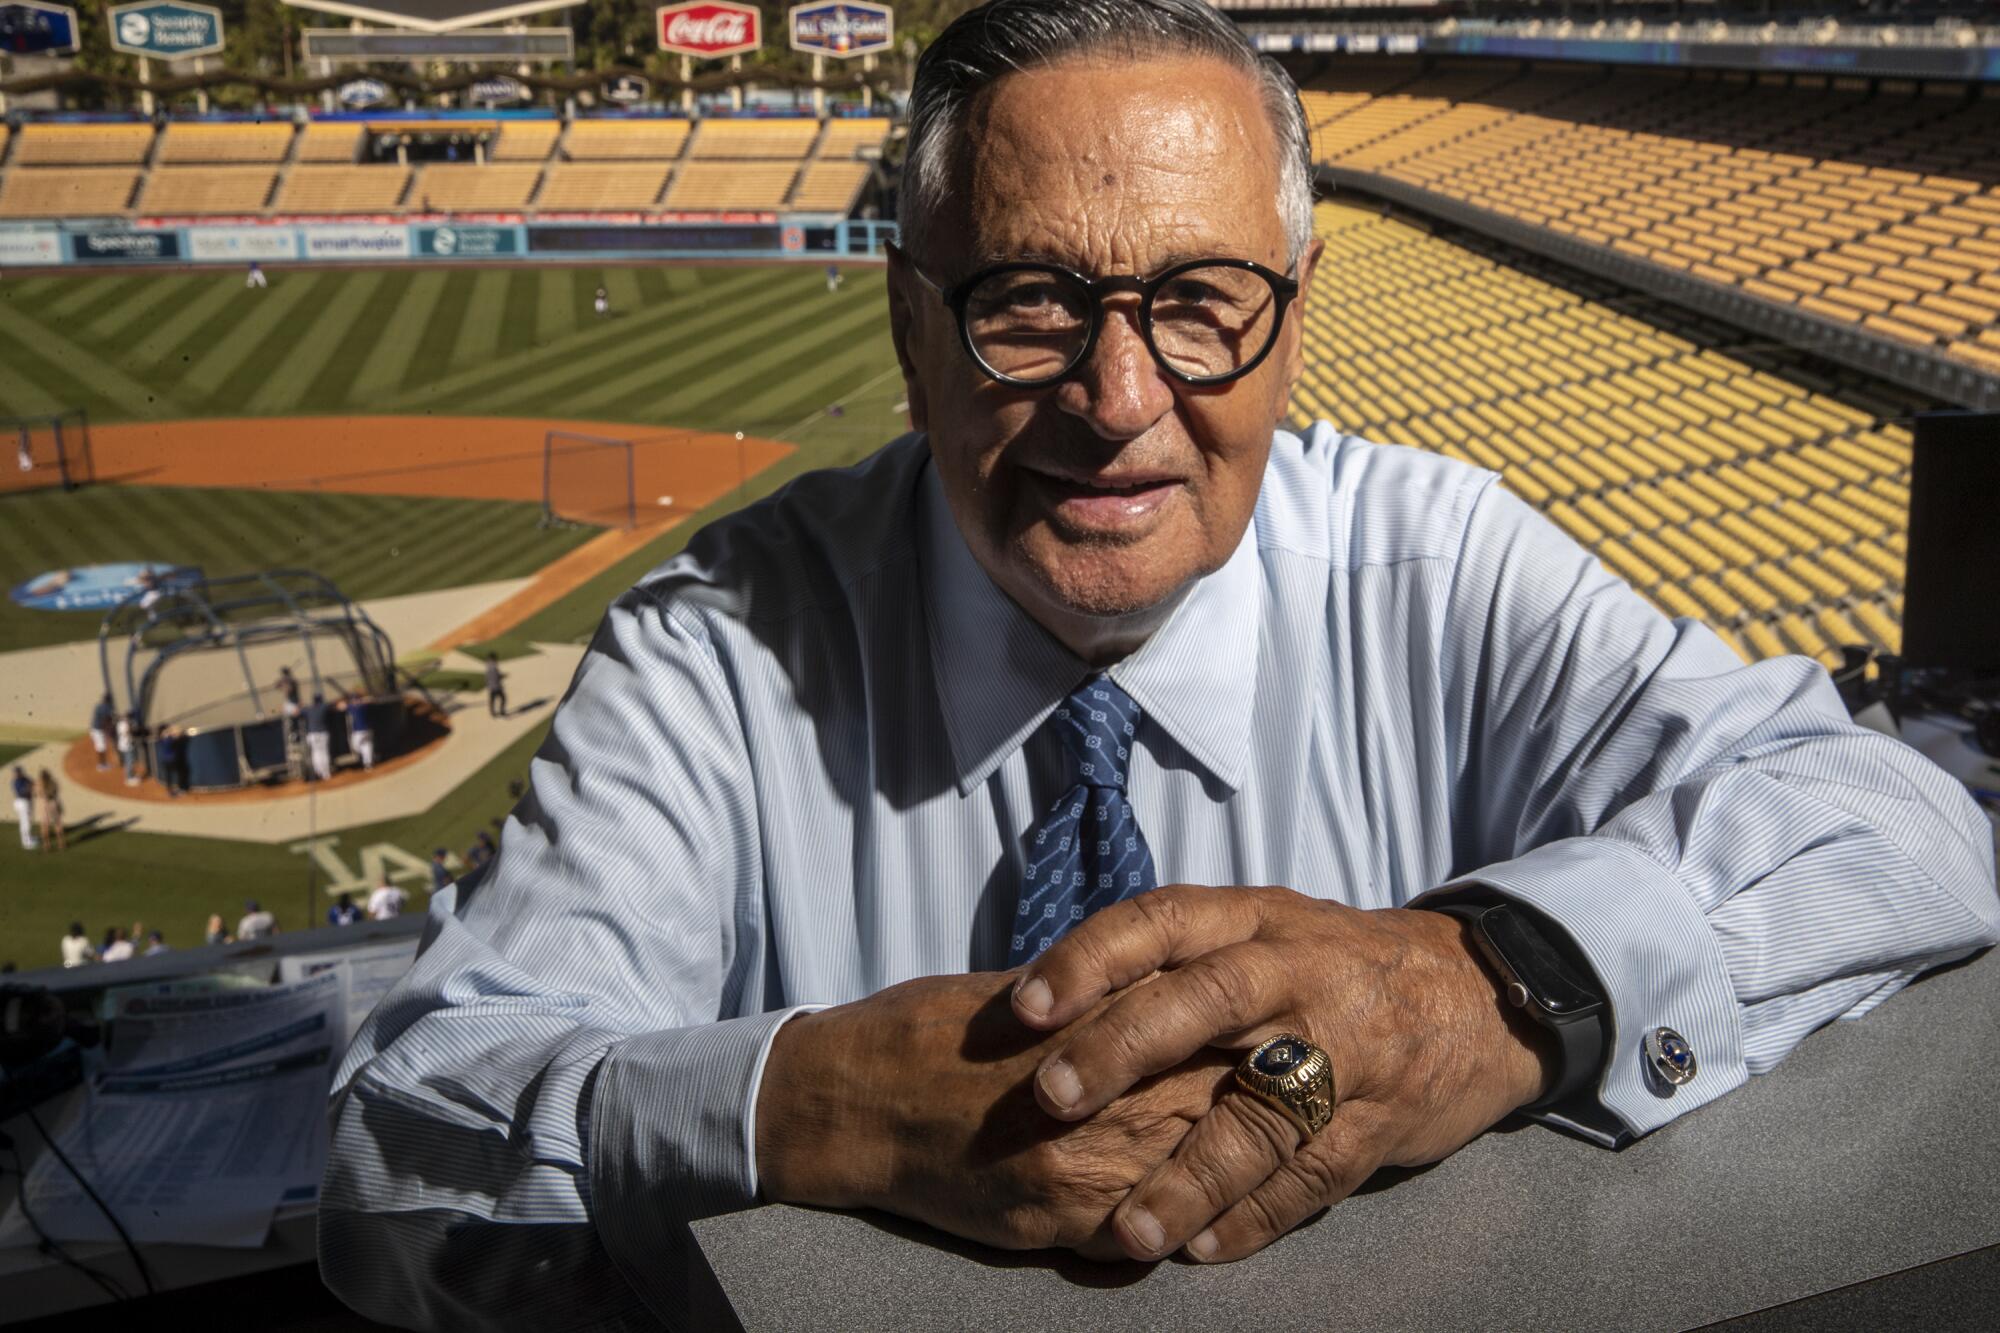 Jaime Jarrin, Leaving a Legacy For The Next Generation